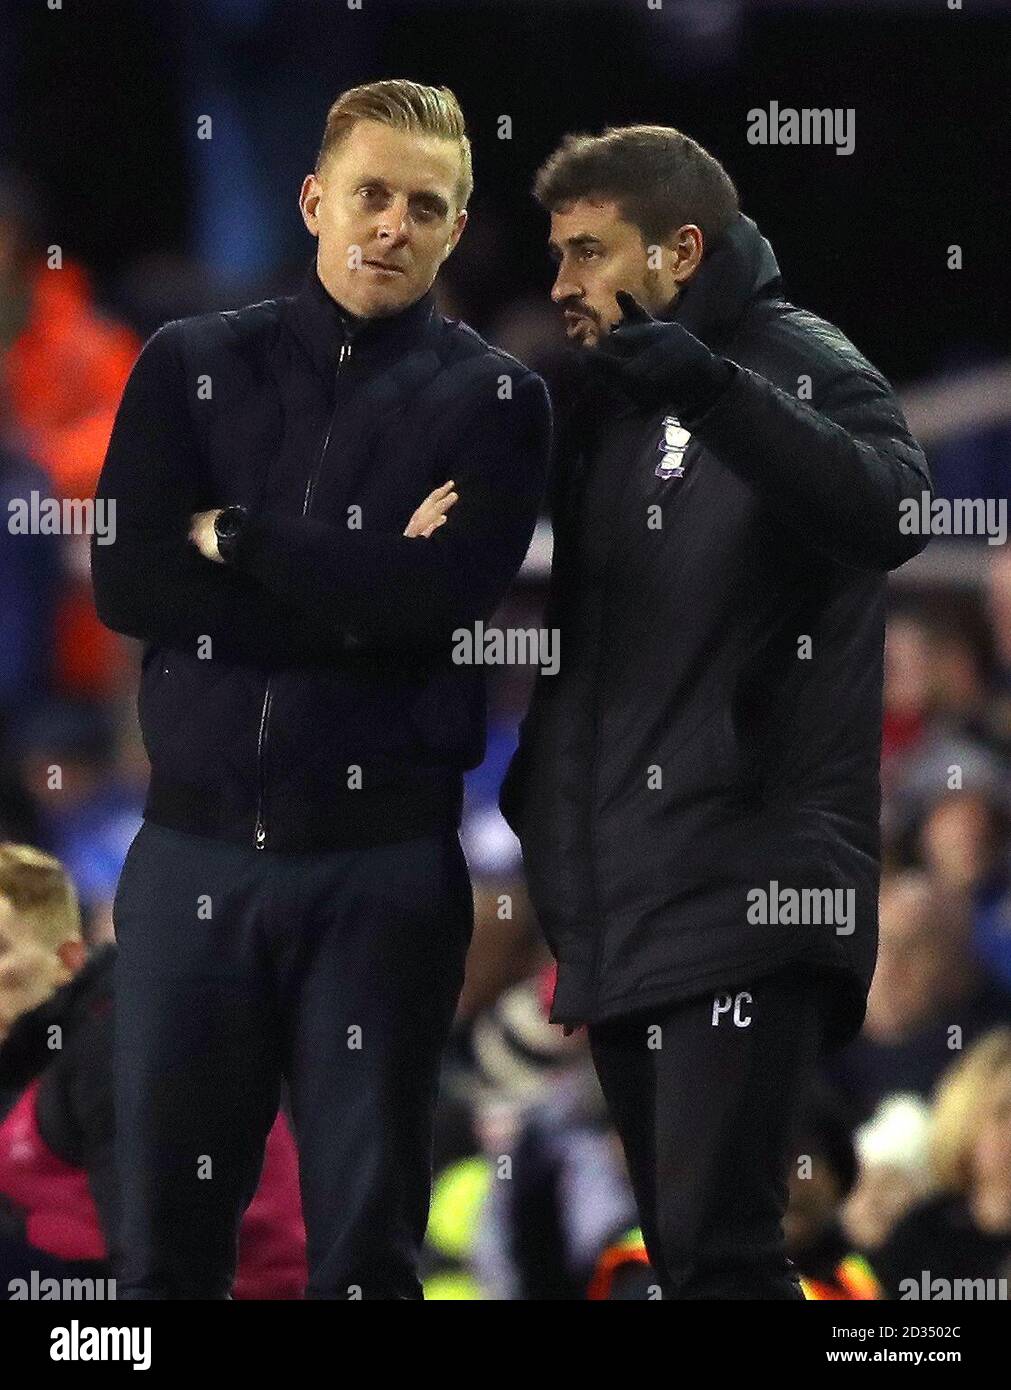 Birmingham City manager Garry Monk (left) and assistant manager Pep Clotet watch match action from the touchline during the Sky Bet Championship match at St Andrew's Trillion Trophy Stadium, Birmingham. Stock Photo